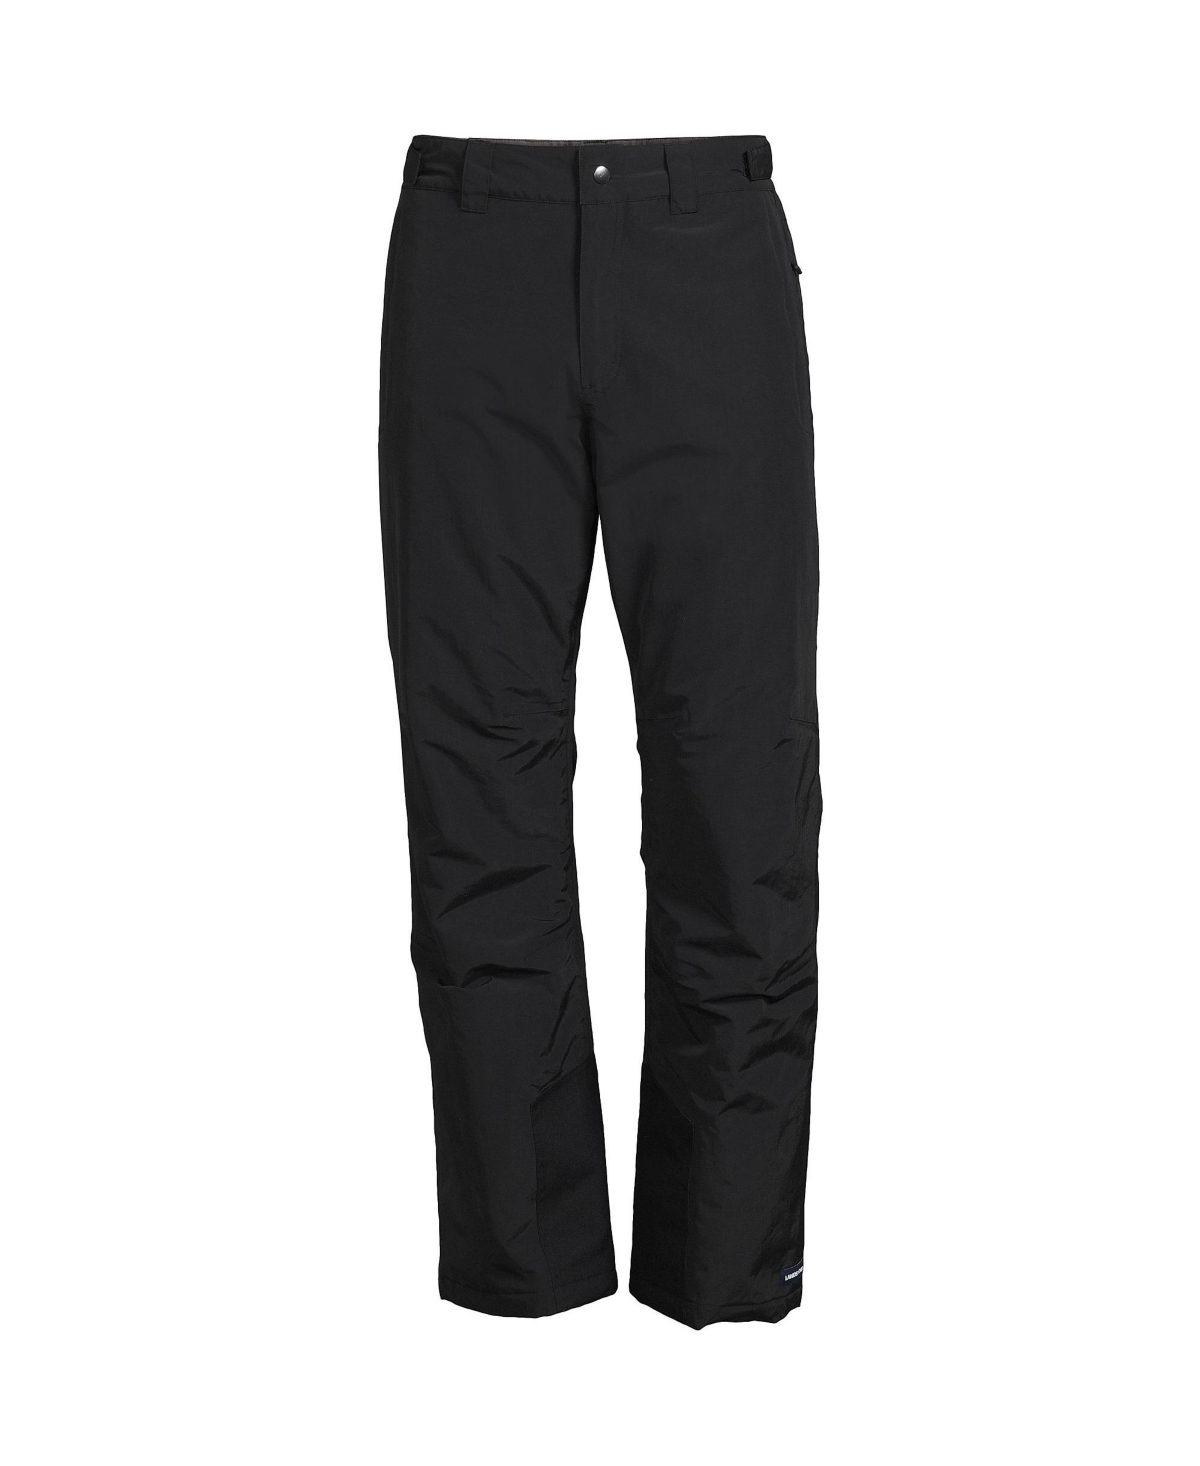 Men's Squall Waterproof Insulated Snow Pants - Black